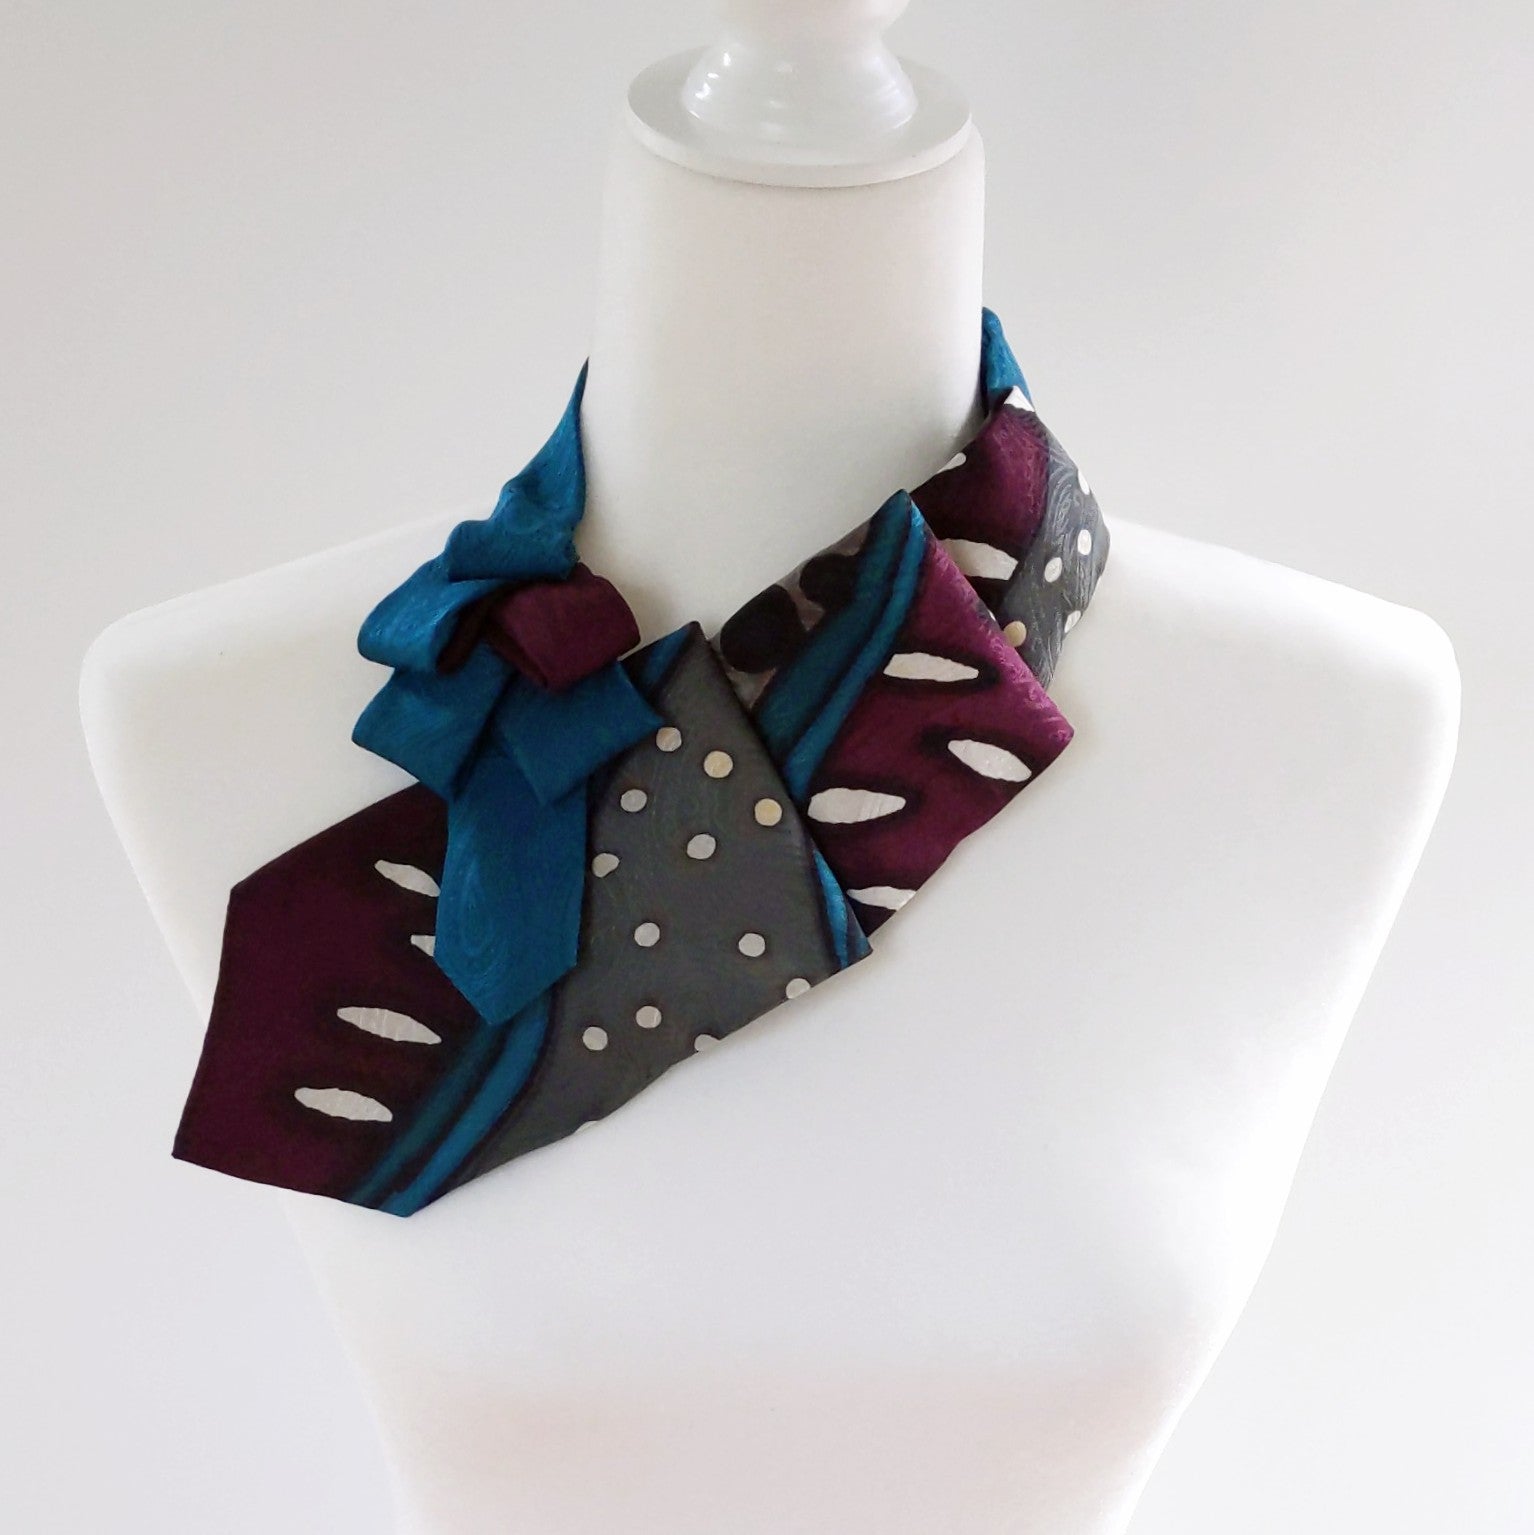 Ascot Scarf In Teal ,Grey And  Plum Abstract Print.